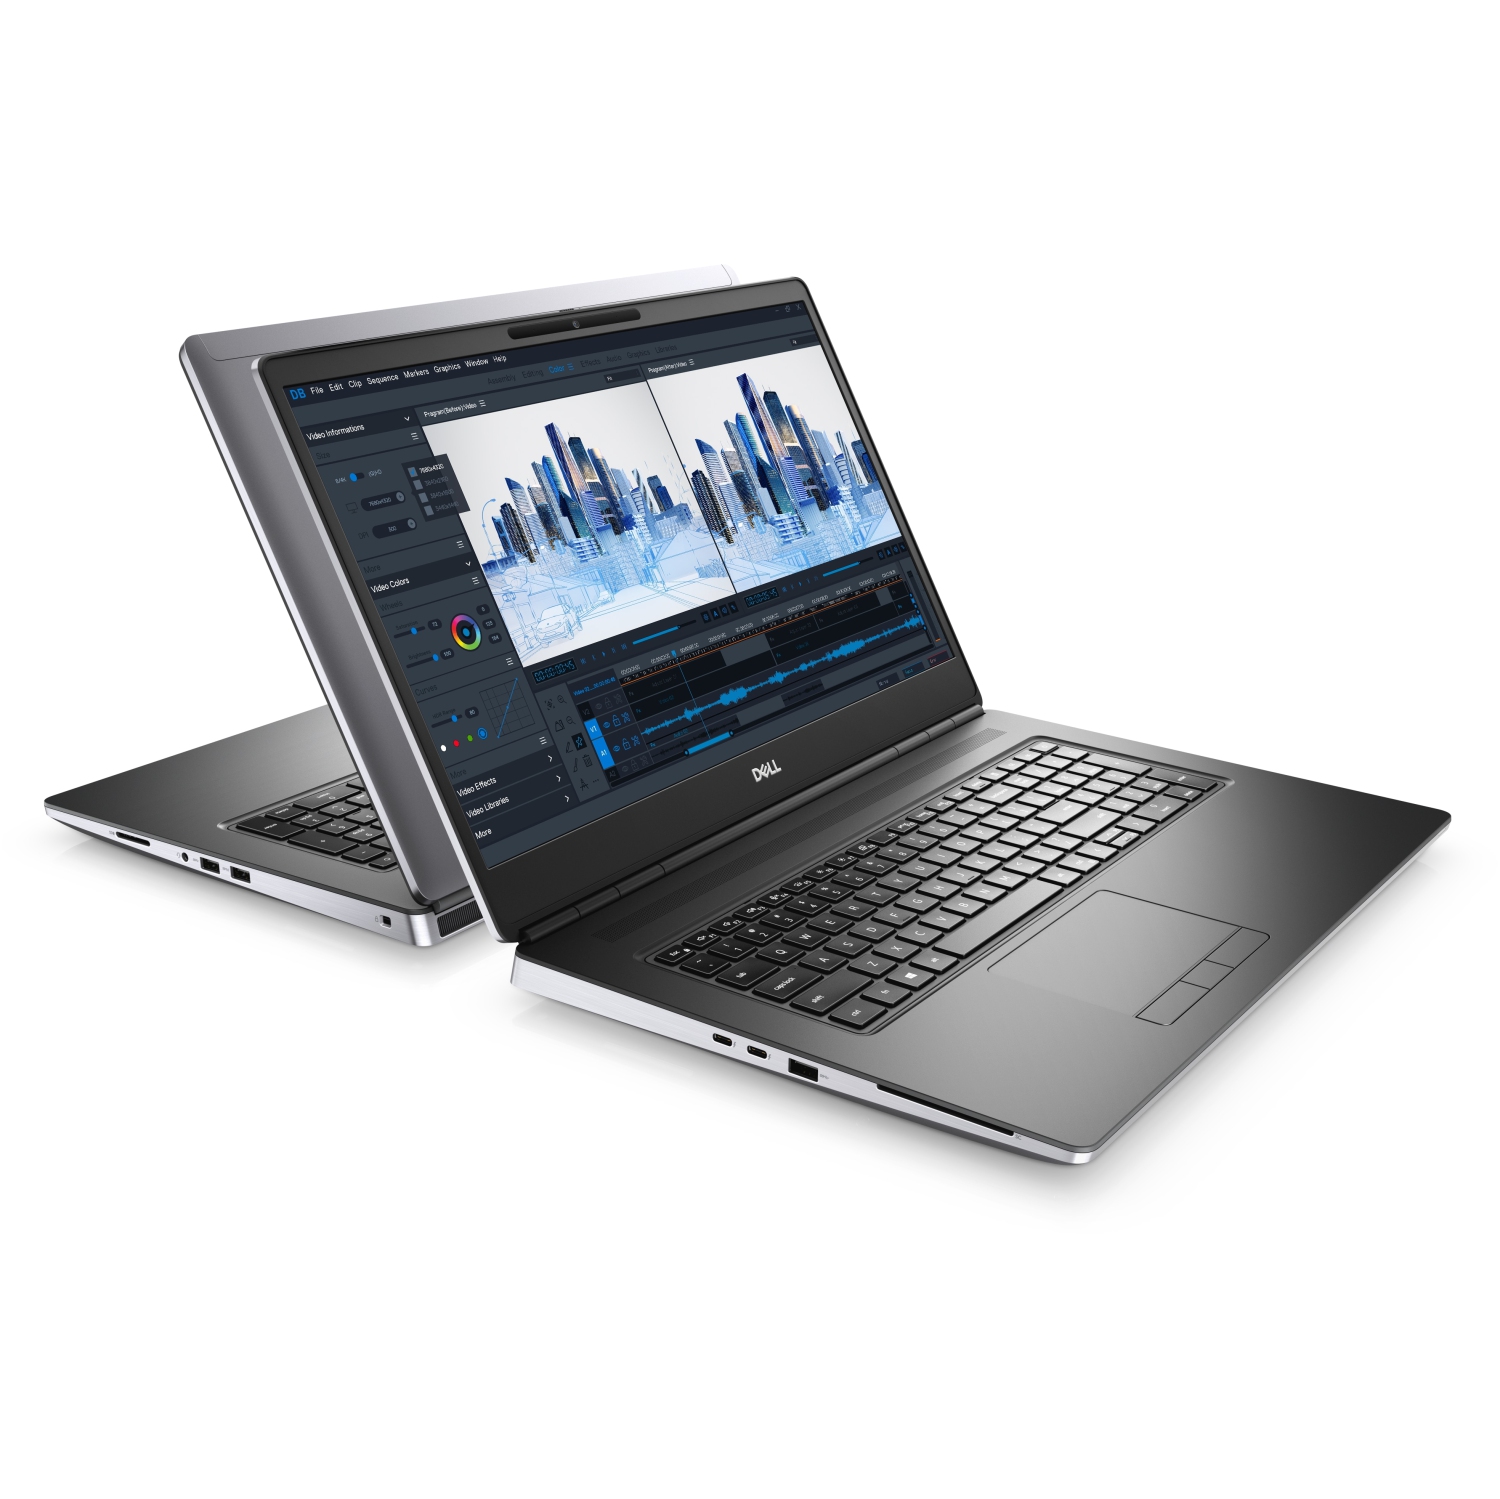 Refurbished (Excellent) - Dell Precision 7000 7760 Workstation Laptop (2021), 17.3" FHD, Core i7, 512GB SSD, 16GB RAM, RTX A5000, 4.8 GHz, 11th Gen CPU Certified